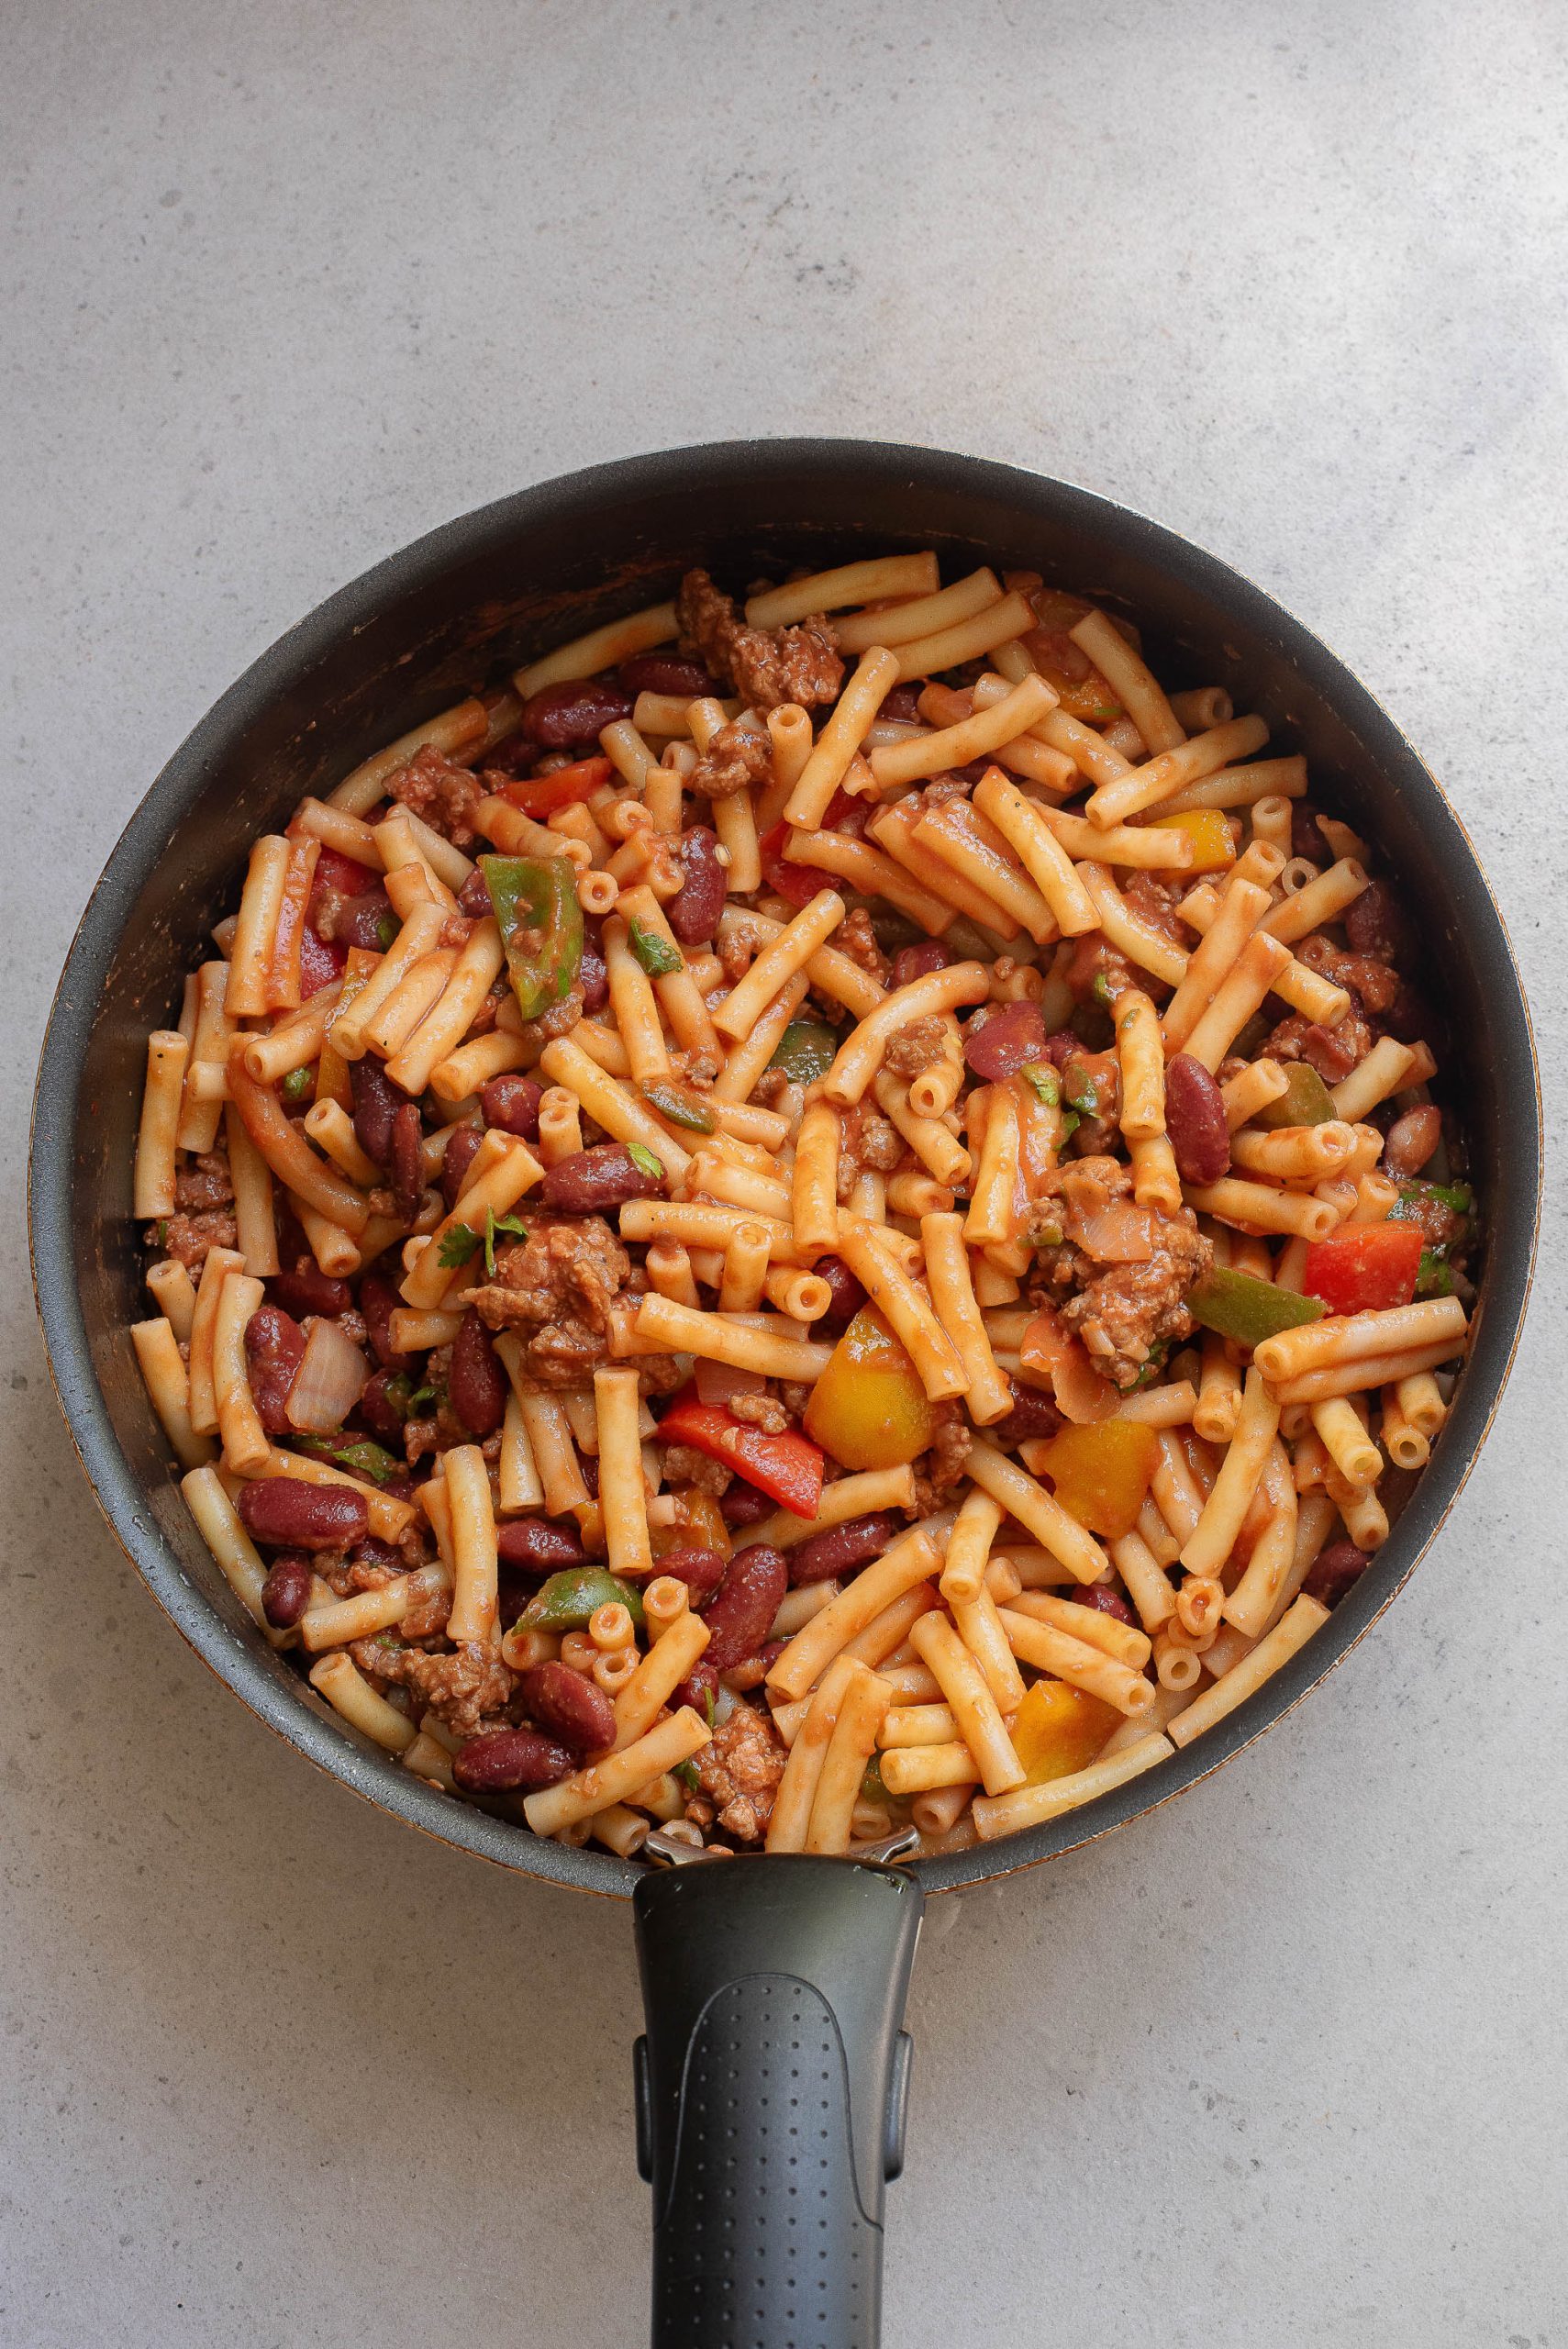 A frying pan filled with pasta and meat.